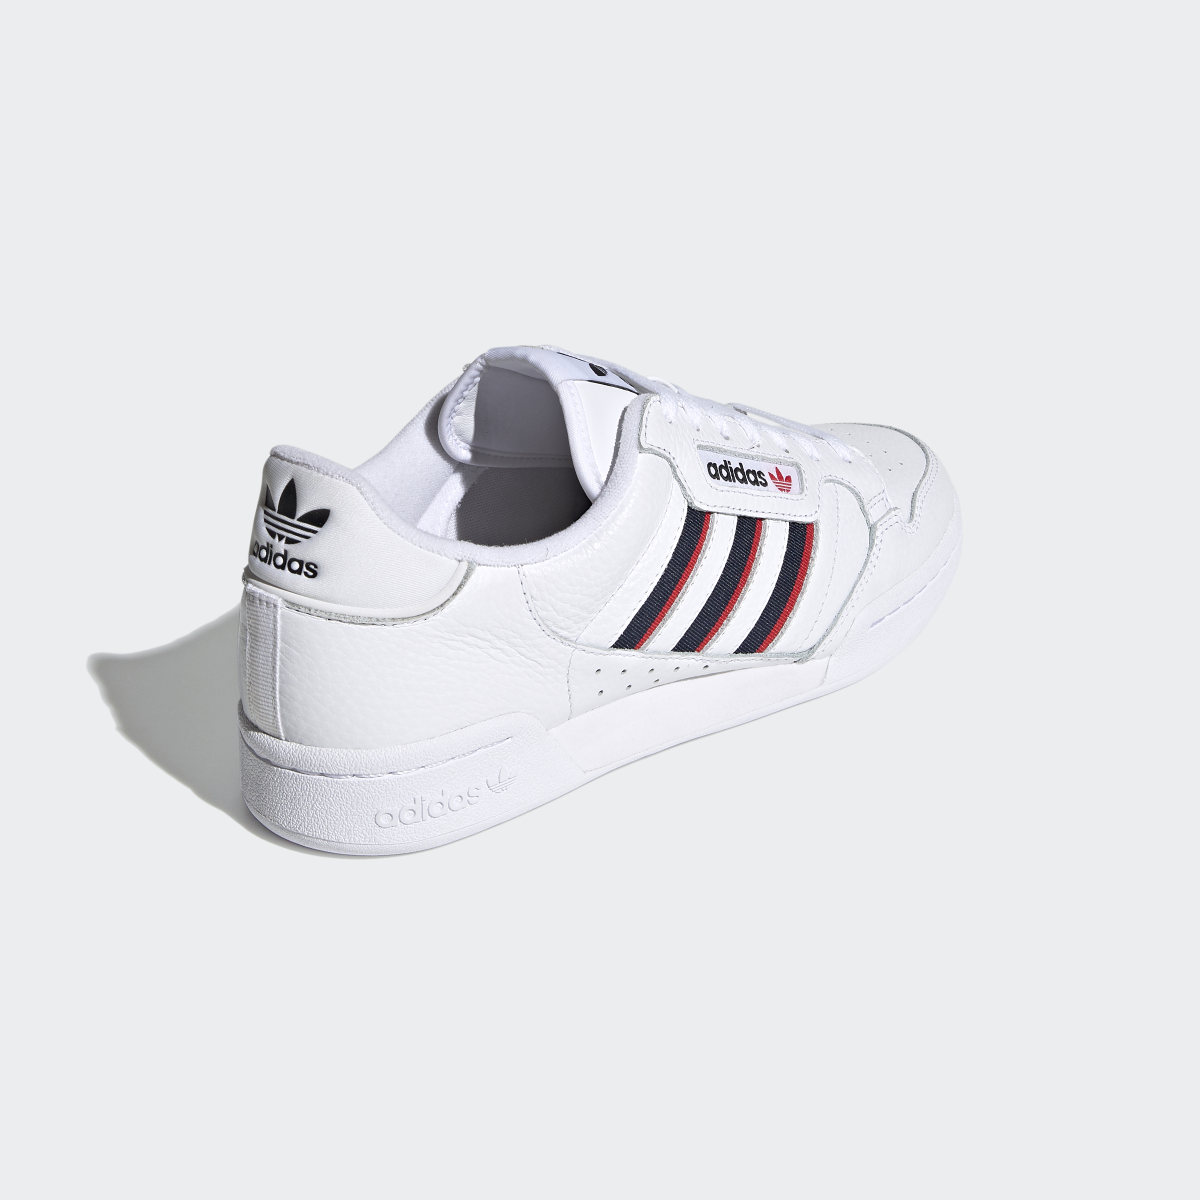 Adidas Continental 80 Stripes Shoes. 6